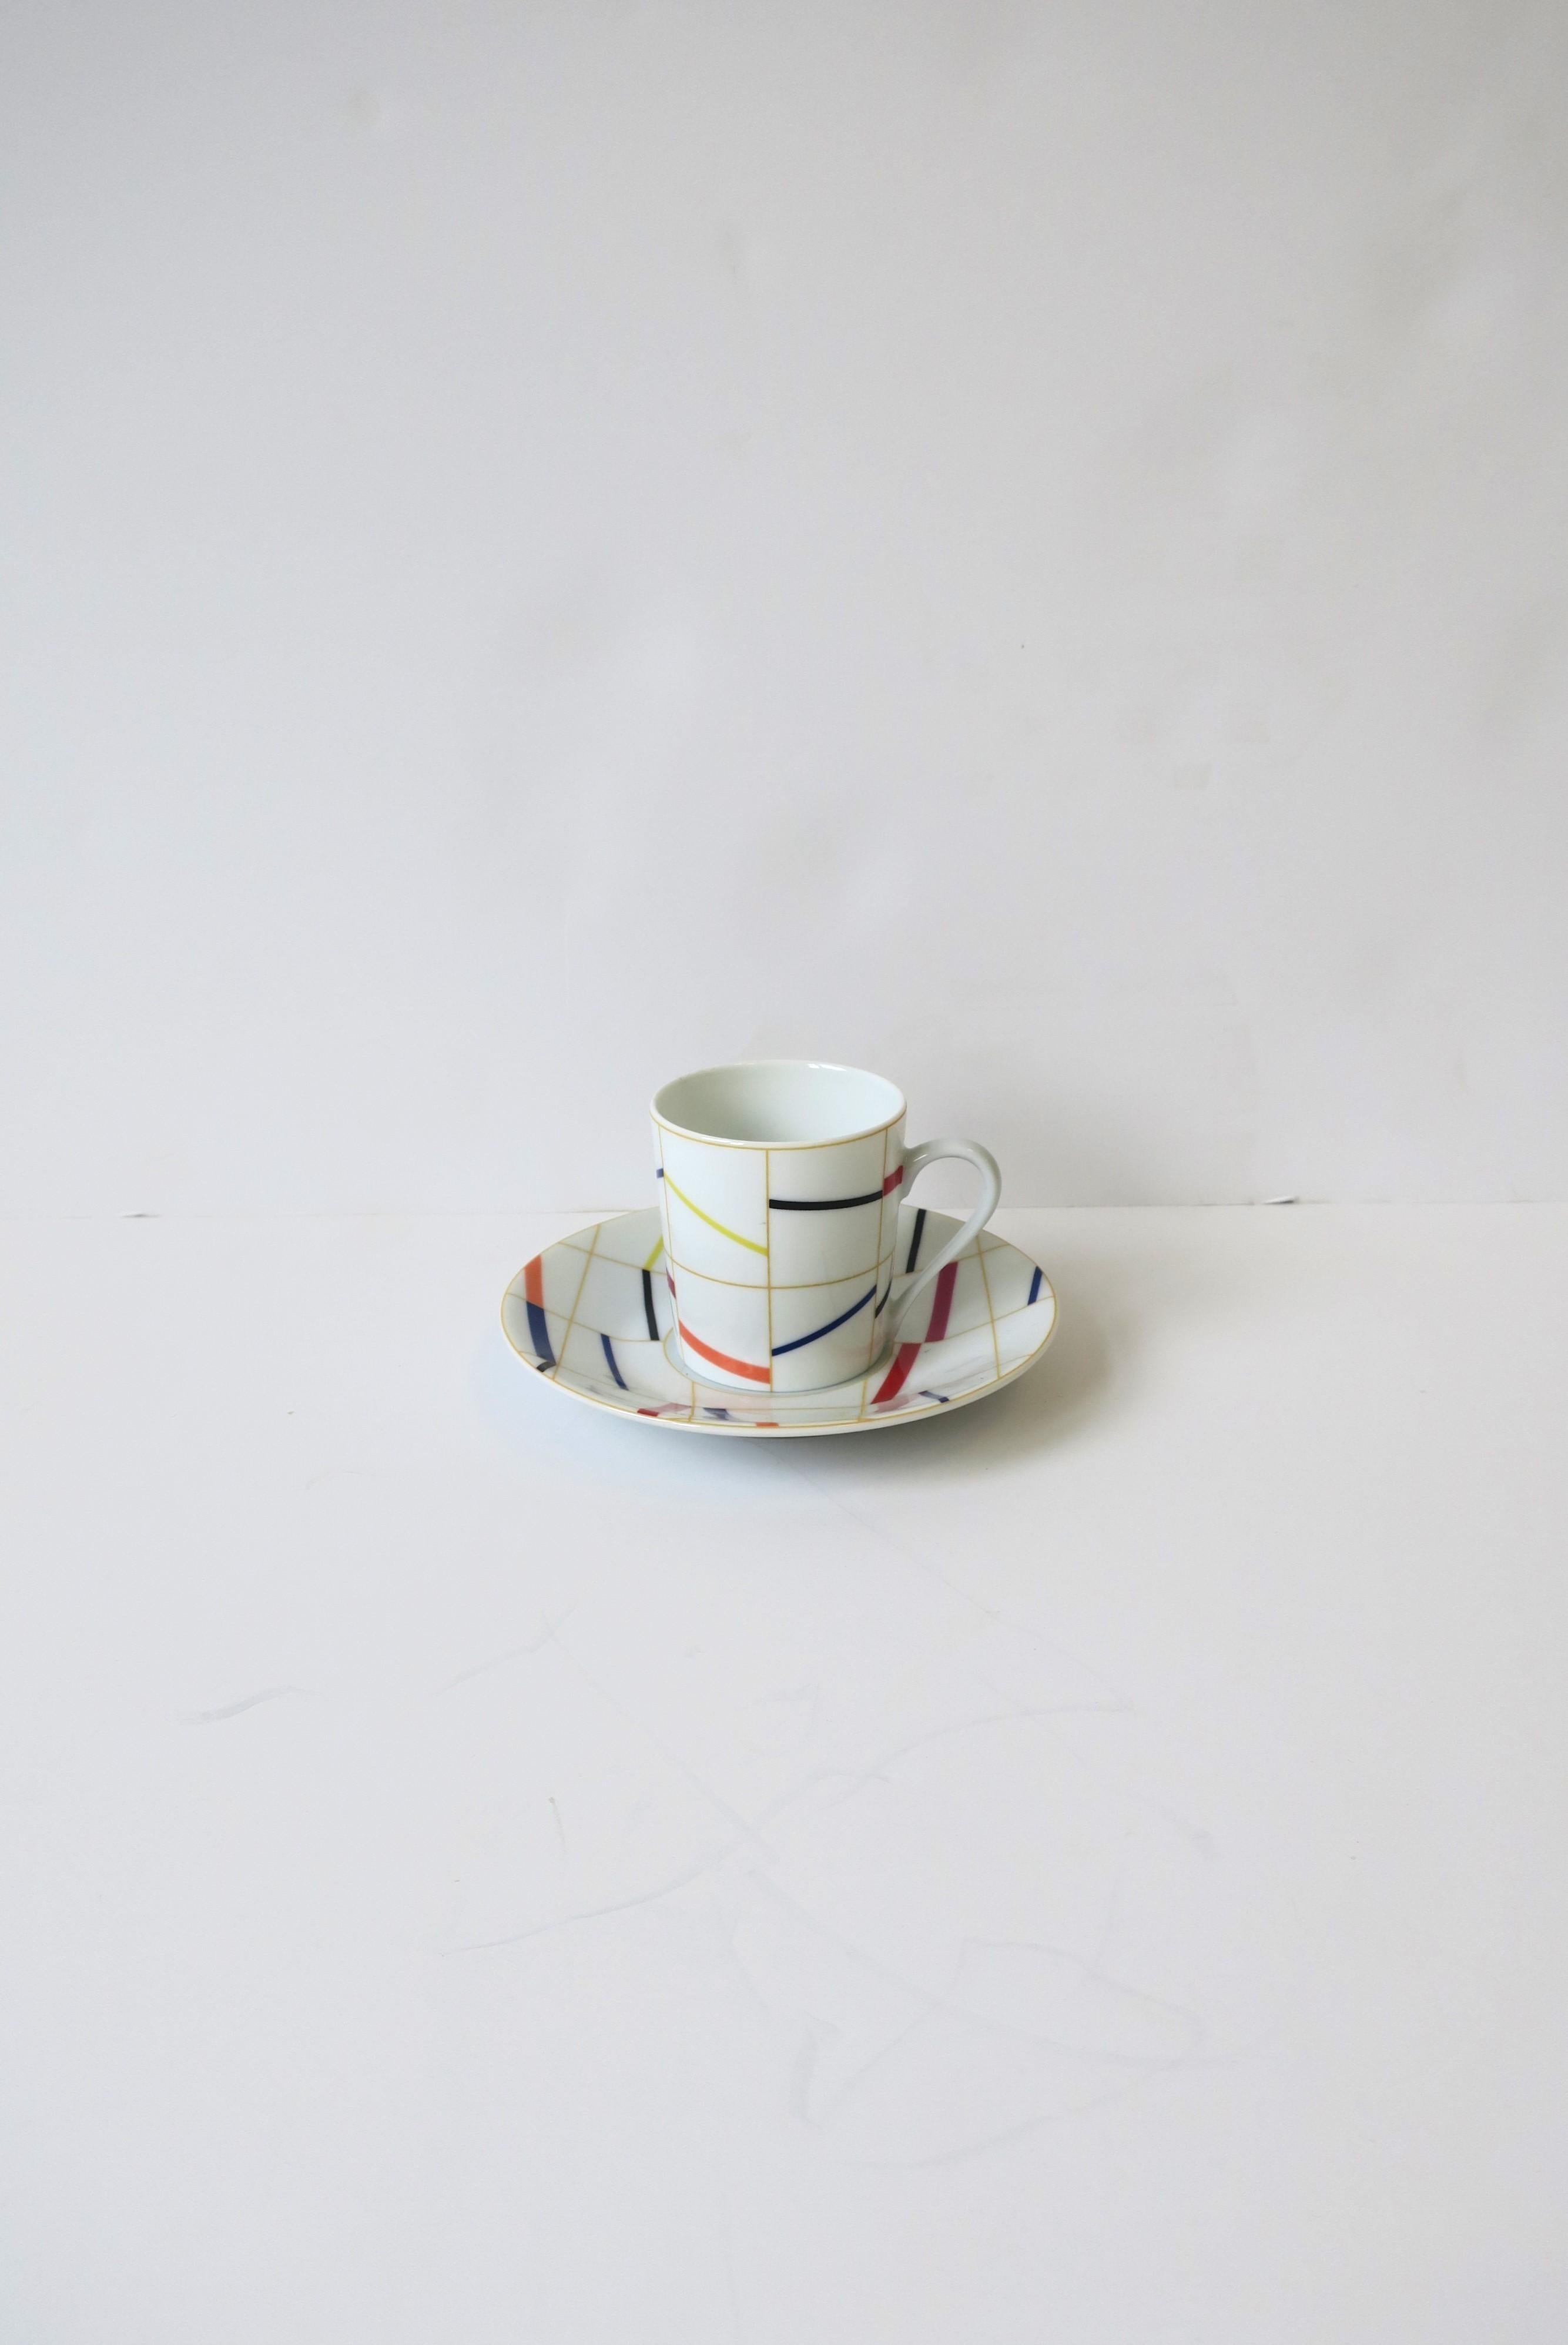 Modern French Porcelain Espresso Coffee or Tea Demitasse Cup Saucer w/Abstract Design For Sale